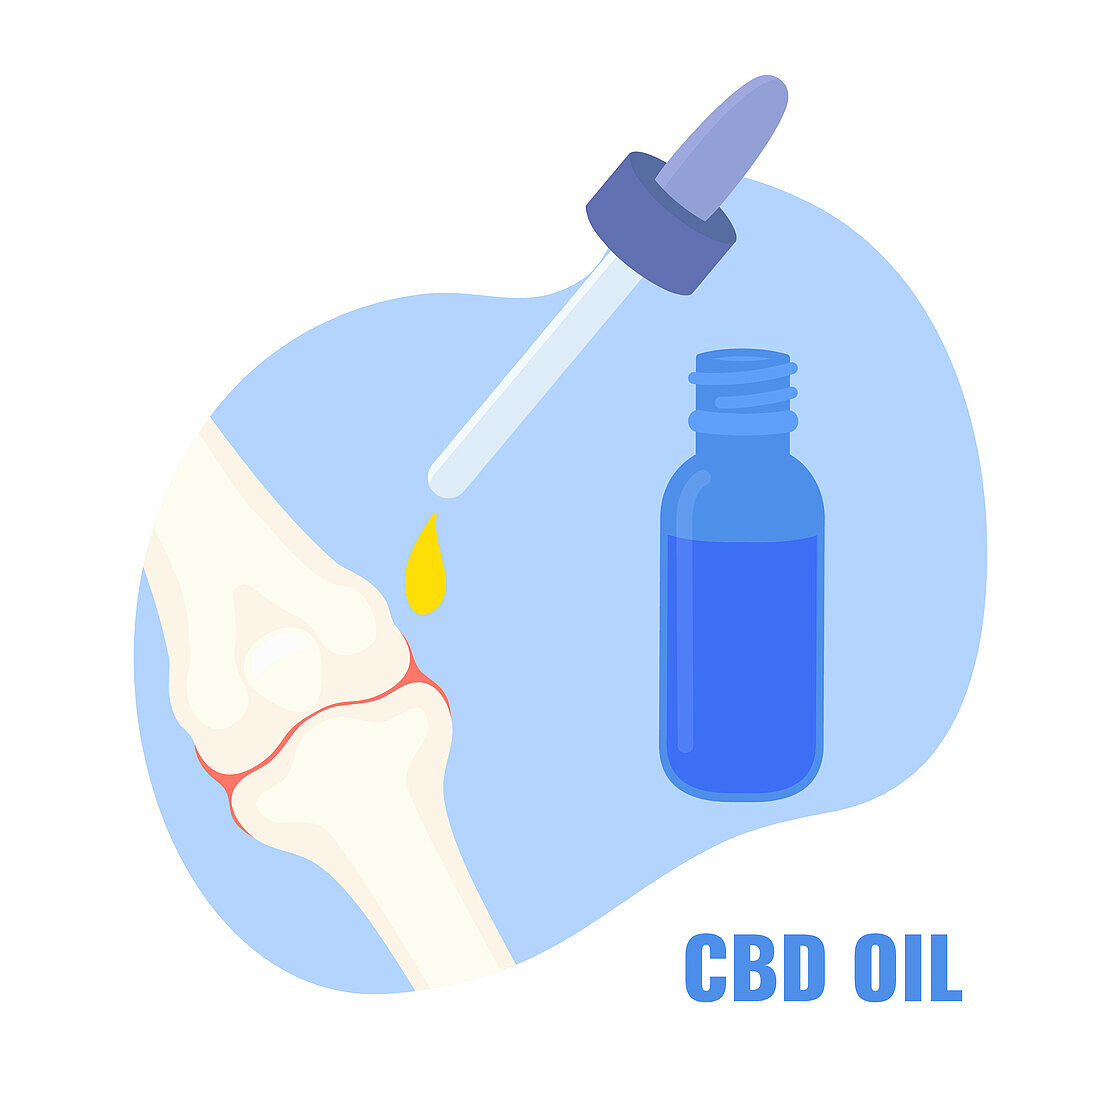 Osteoporosis treatment with CBD oil, conceptual illustration